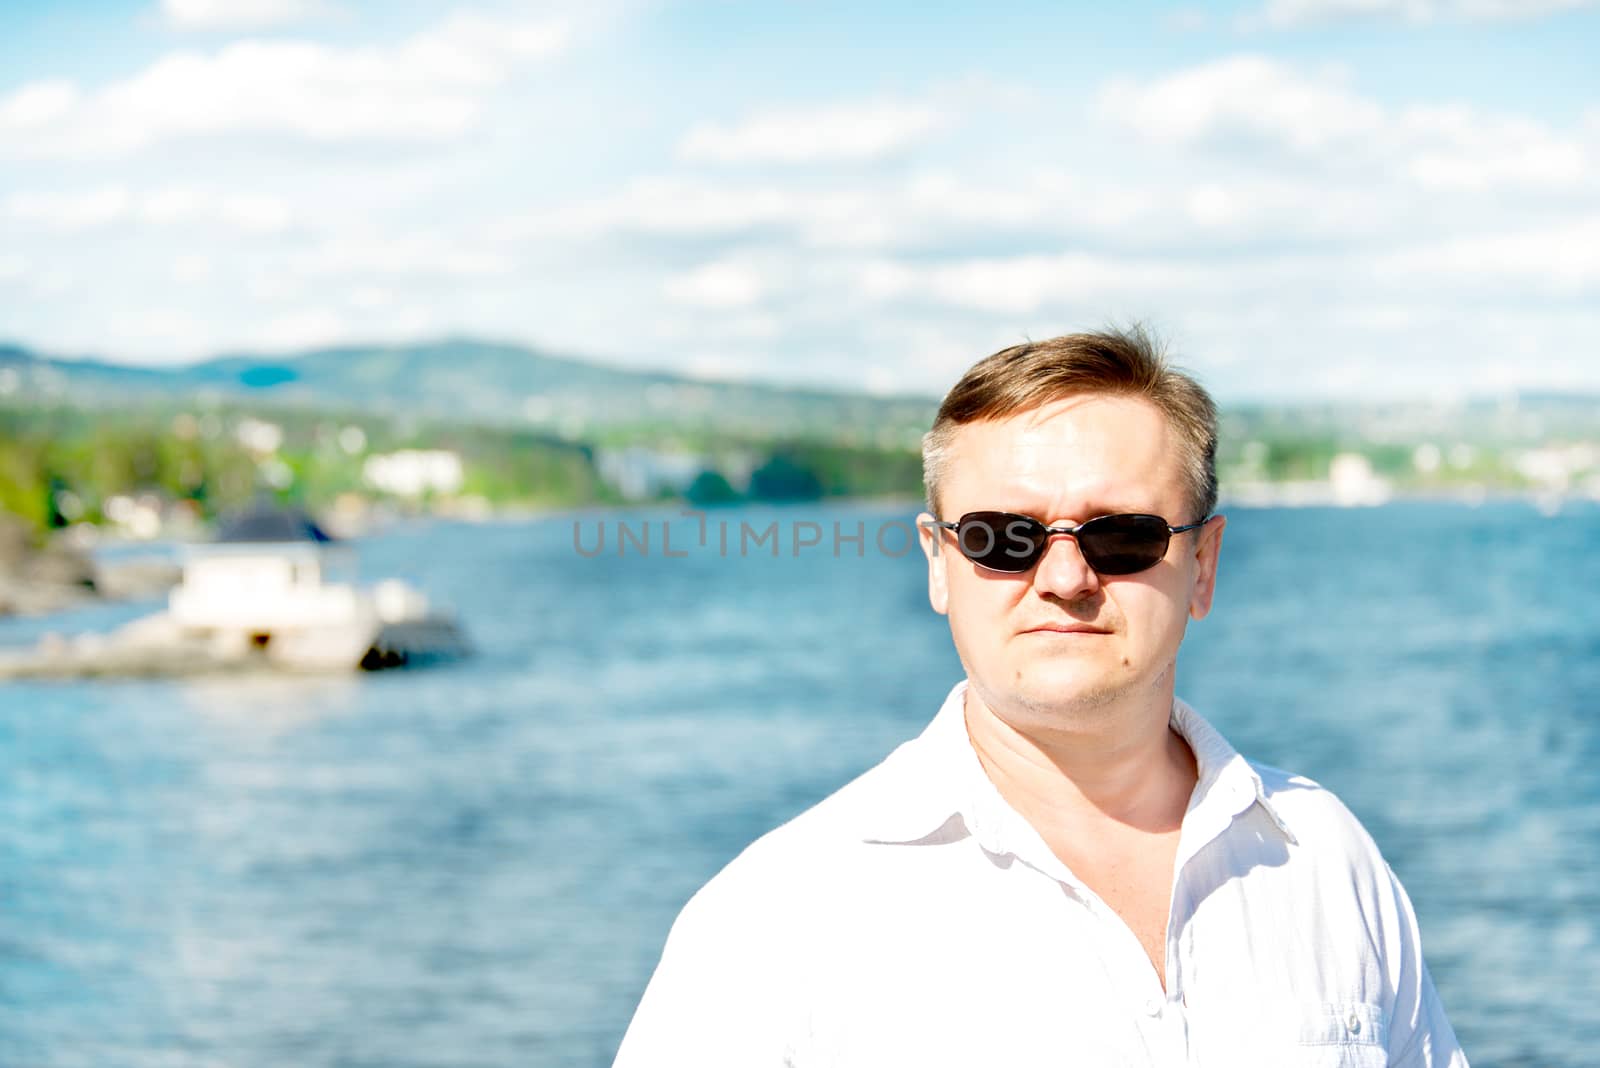 Middle aged man portrait with sea at background